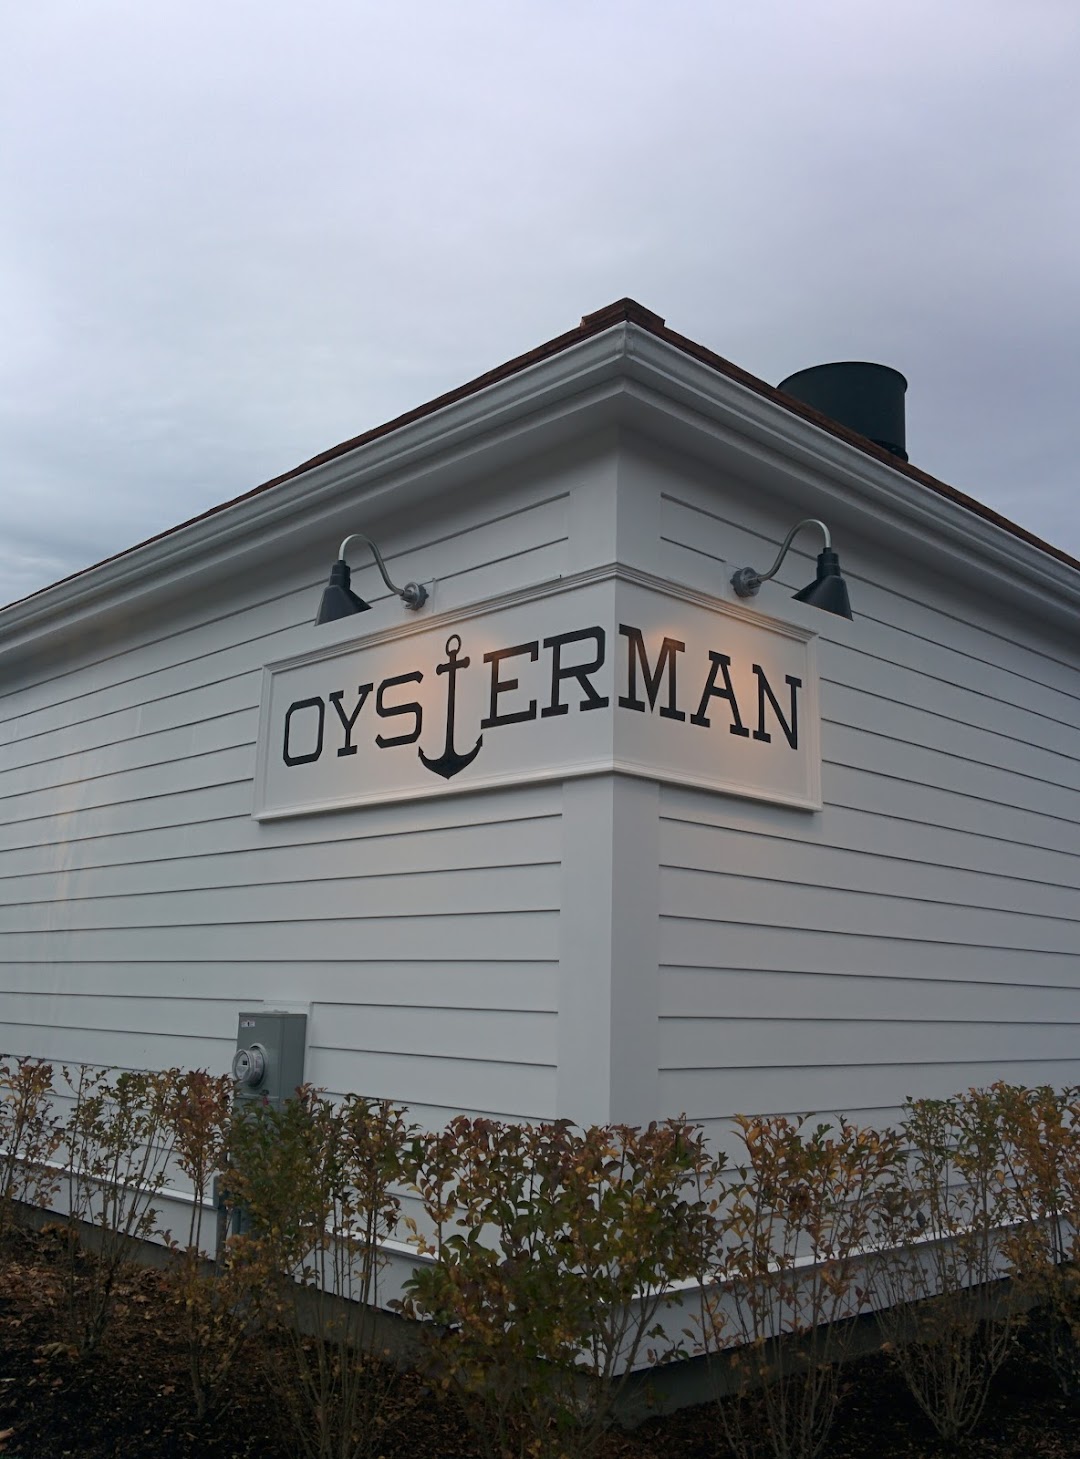 The Oysterman